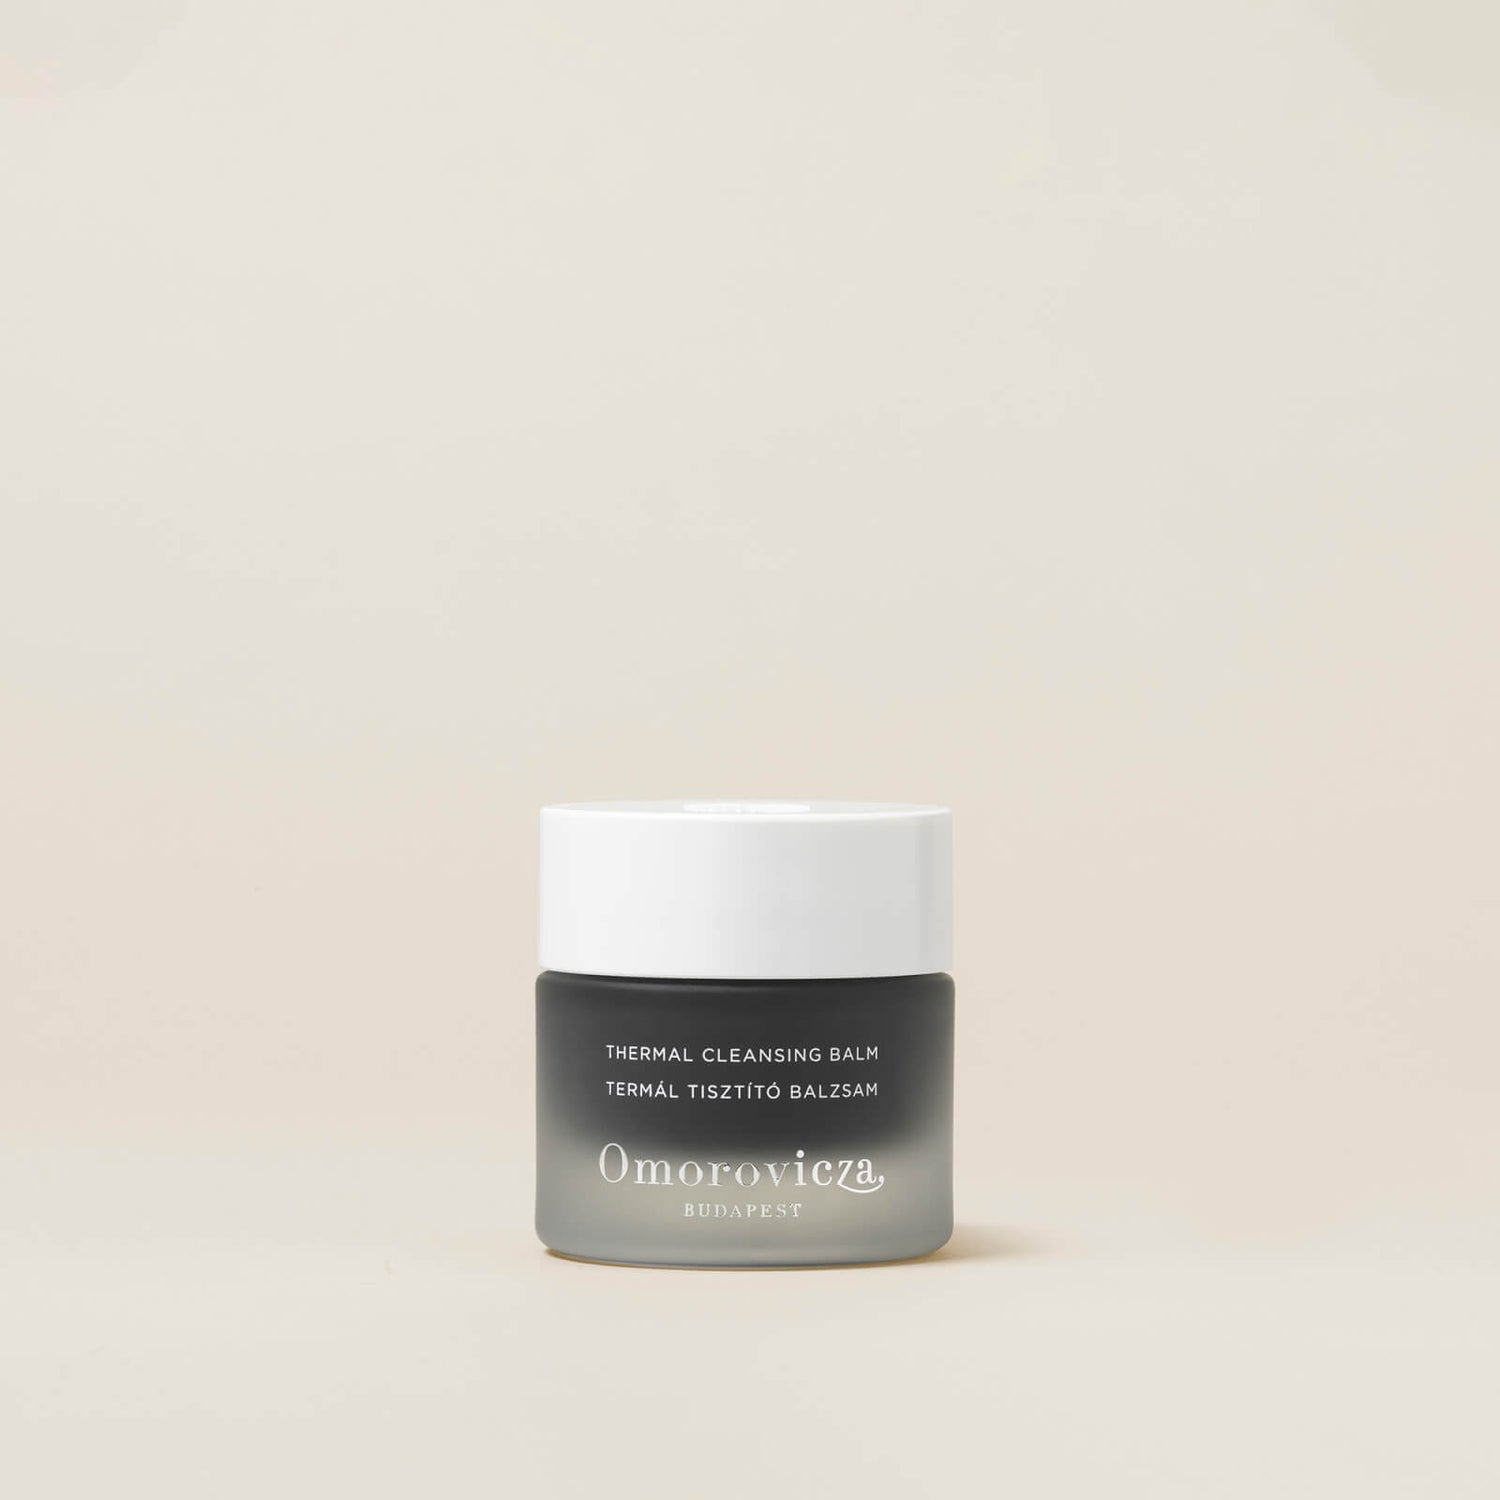 Omorovicza Thermal Cleansing Balm (50 ml)